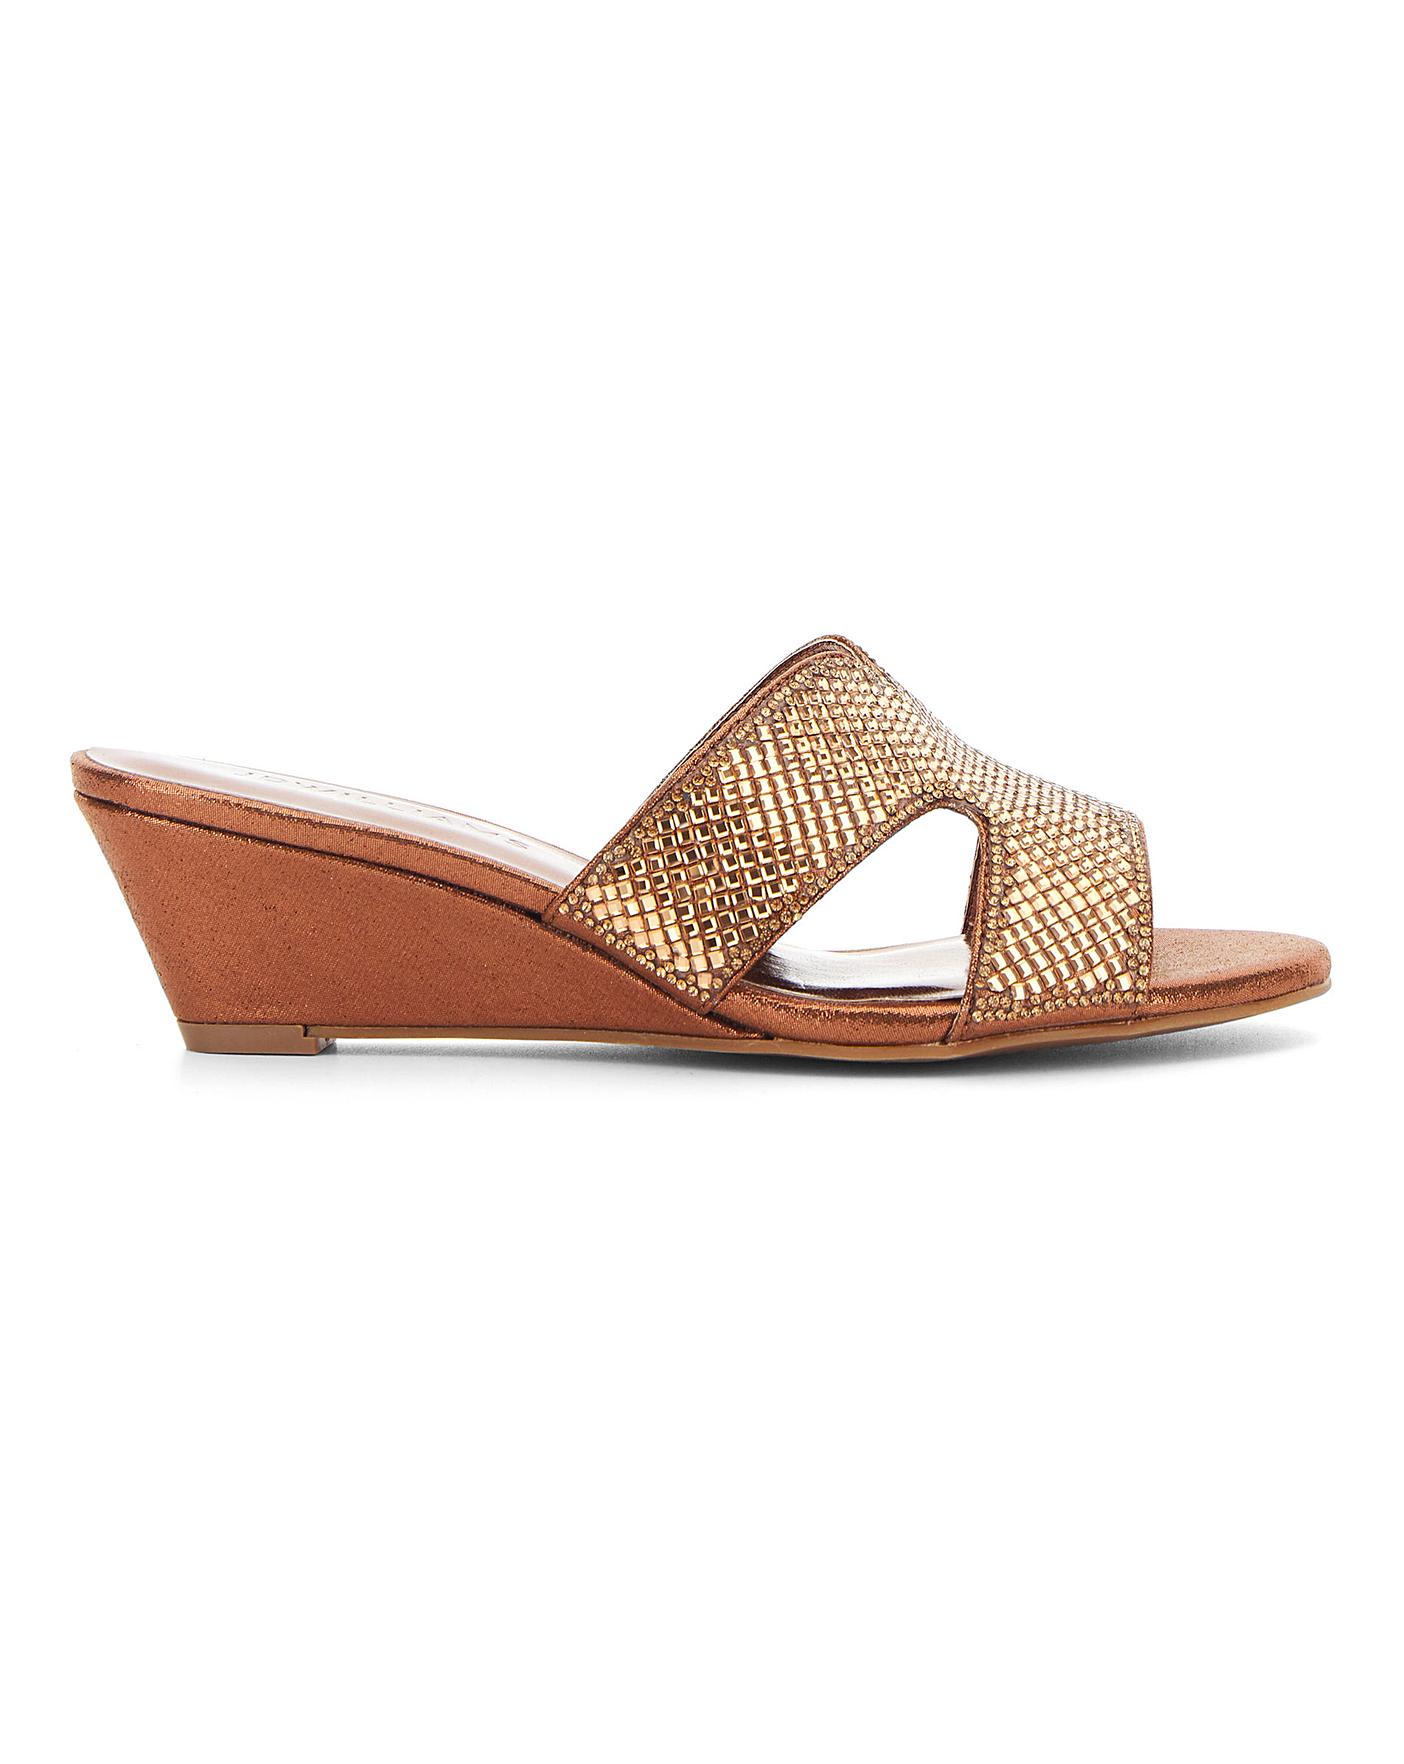 Occasion Wedge Mule Sandals EEE Fit | J D Williams